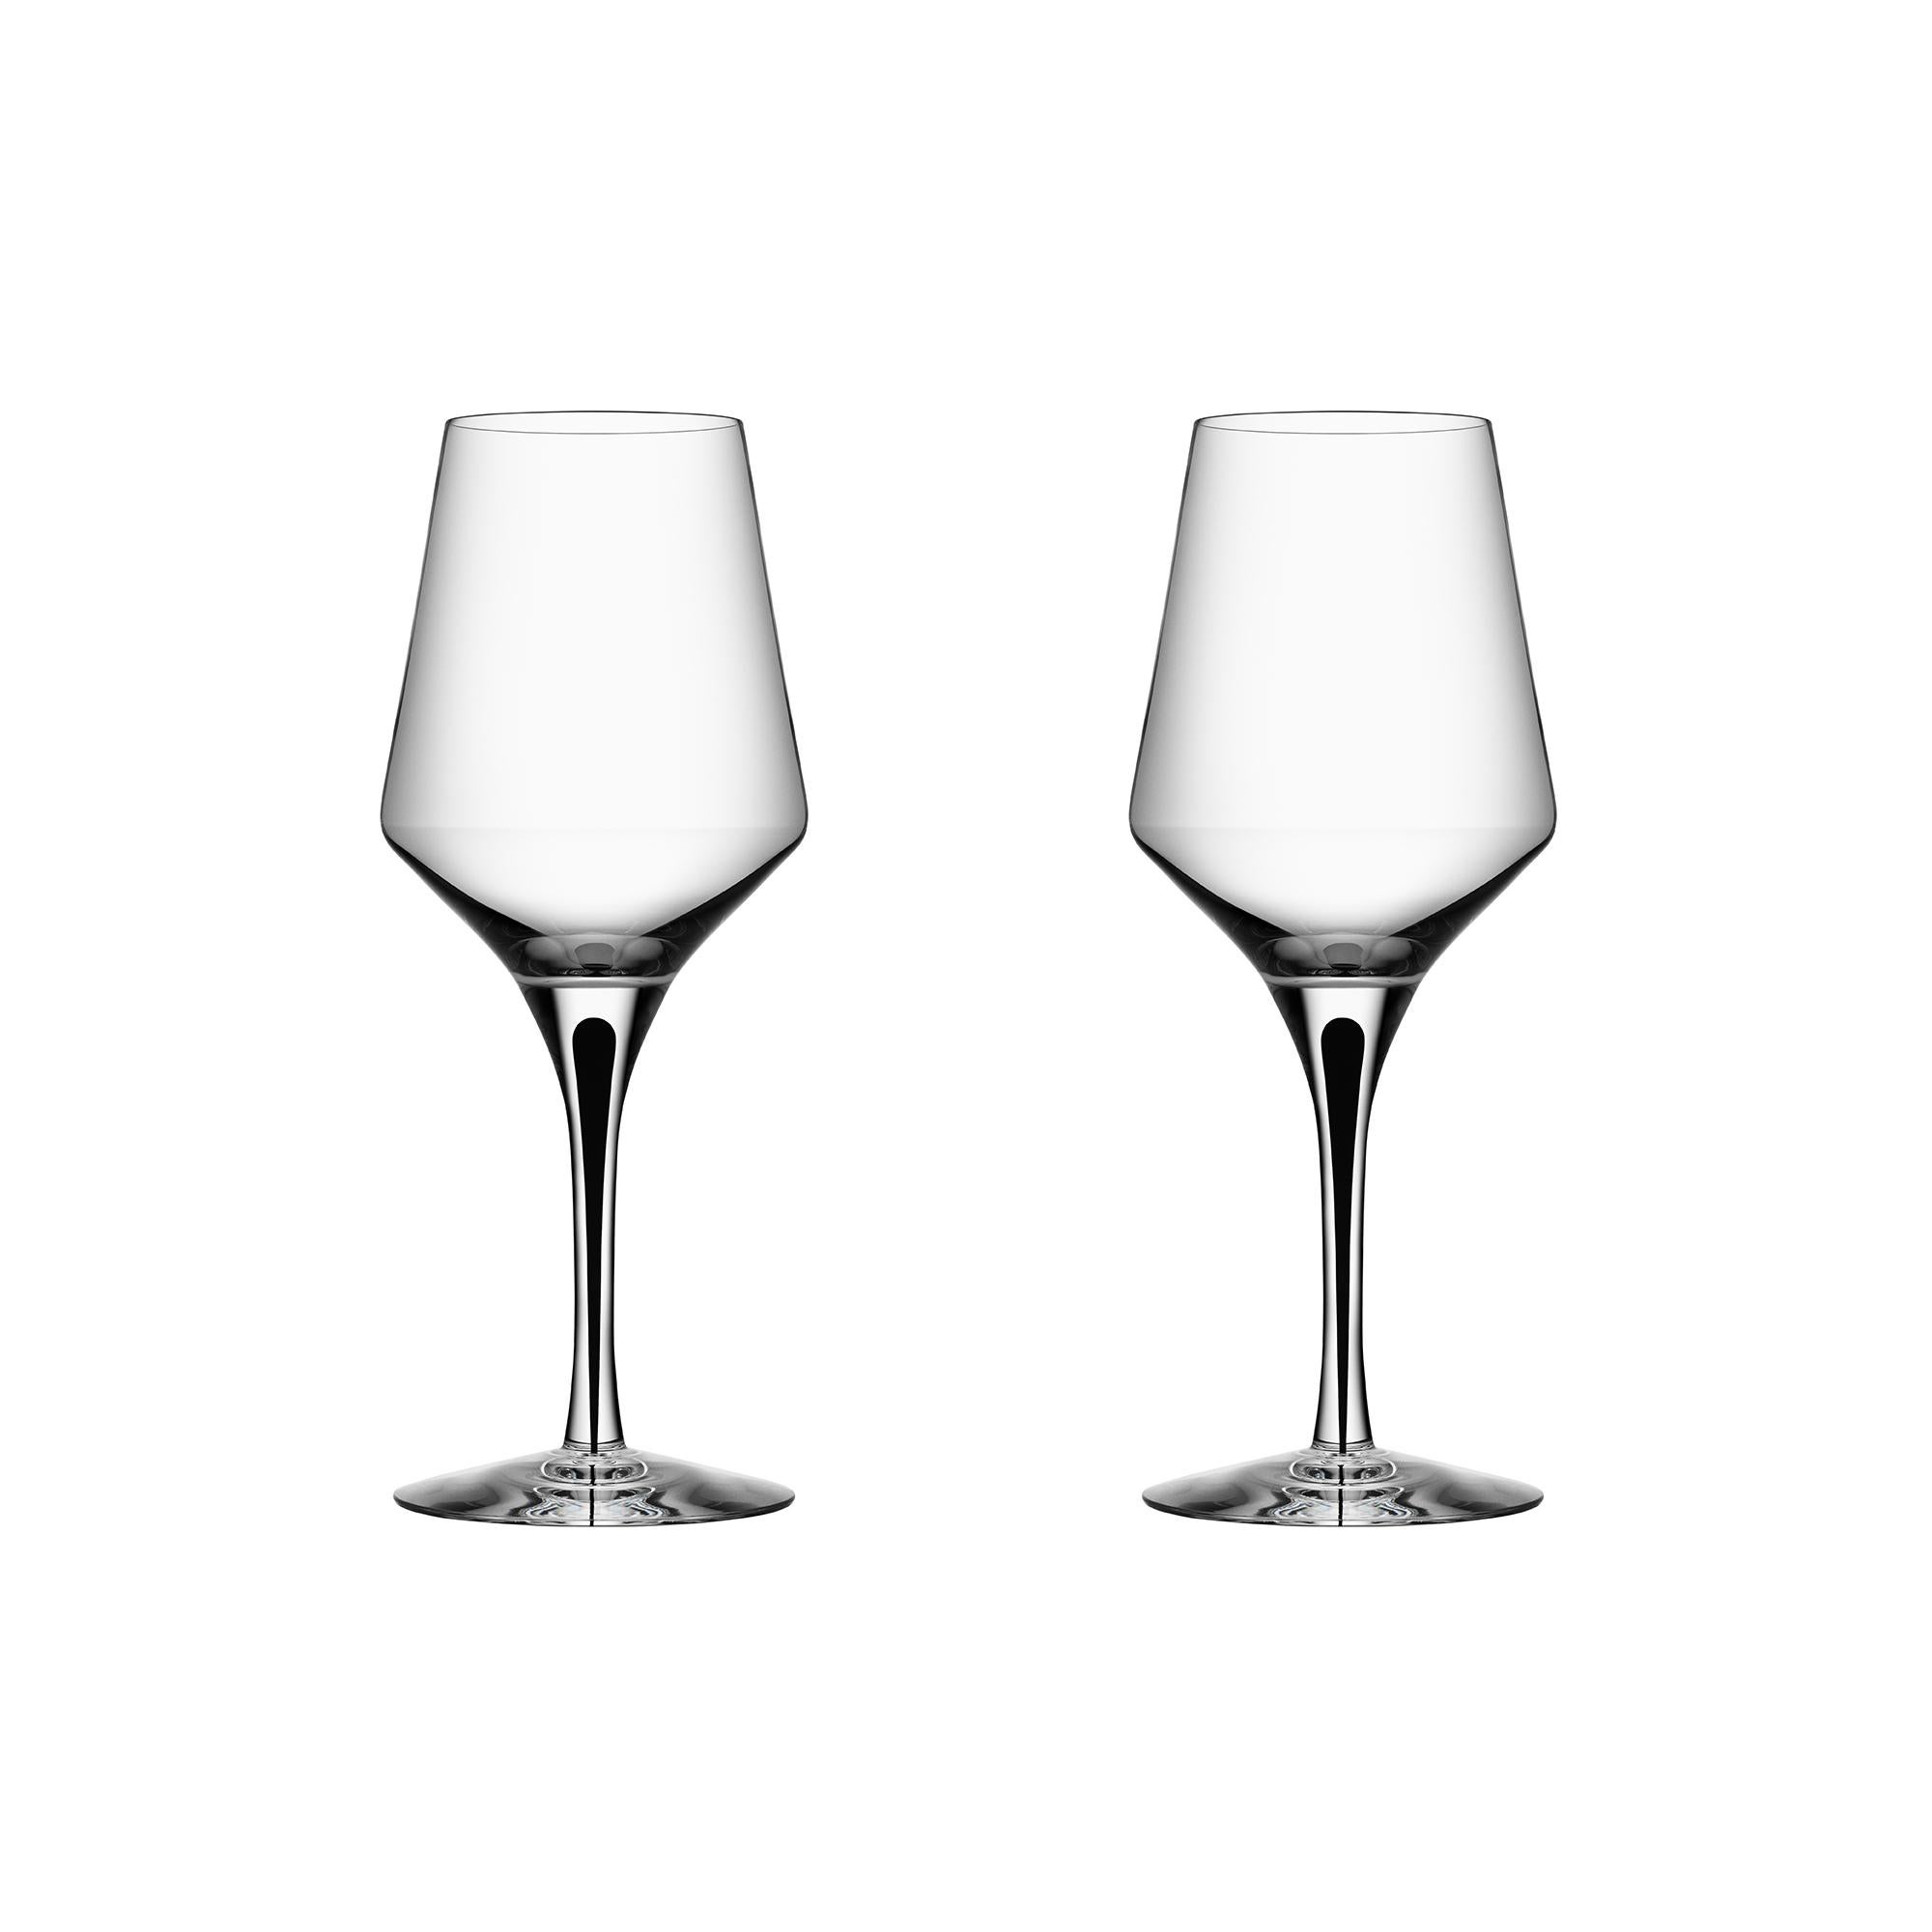 Metropol White Wine from Orrefors, which holds 13.5 oz, is ideal for any white wine. The wine glass is mouth-blown in Sweden by expert glassblowers and inspired by Erika Lagerbielke’s classic Intermezzo design, but with a drop of black sealed inside